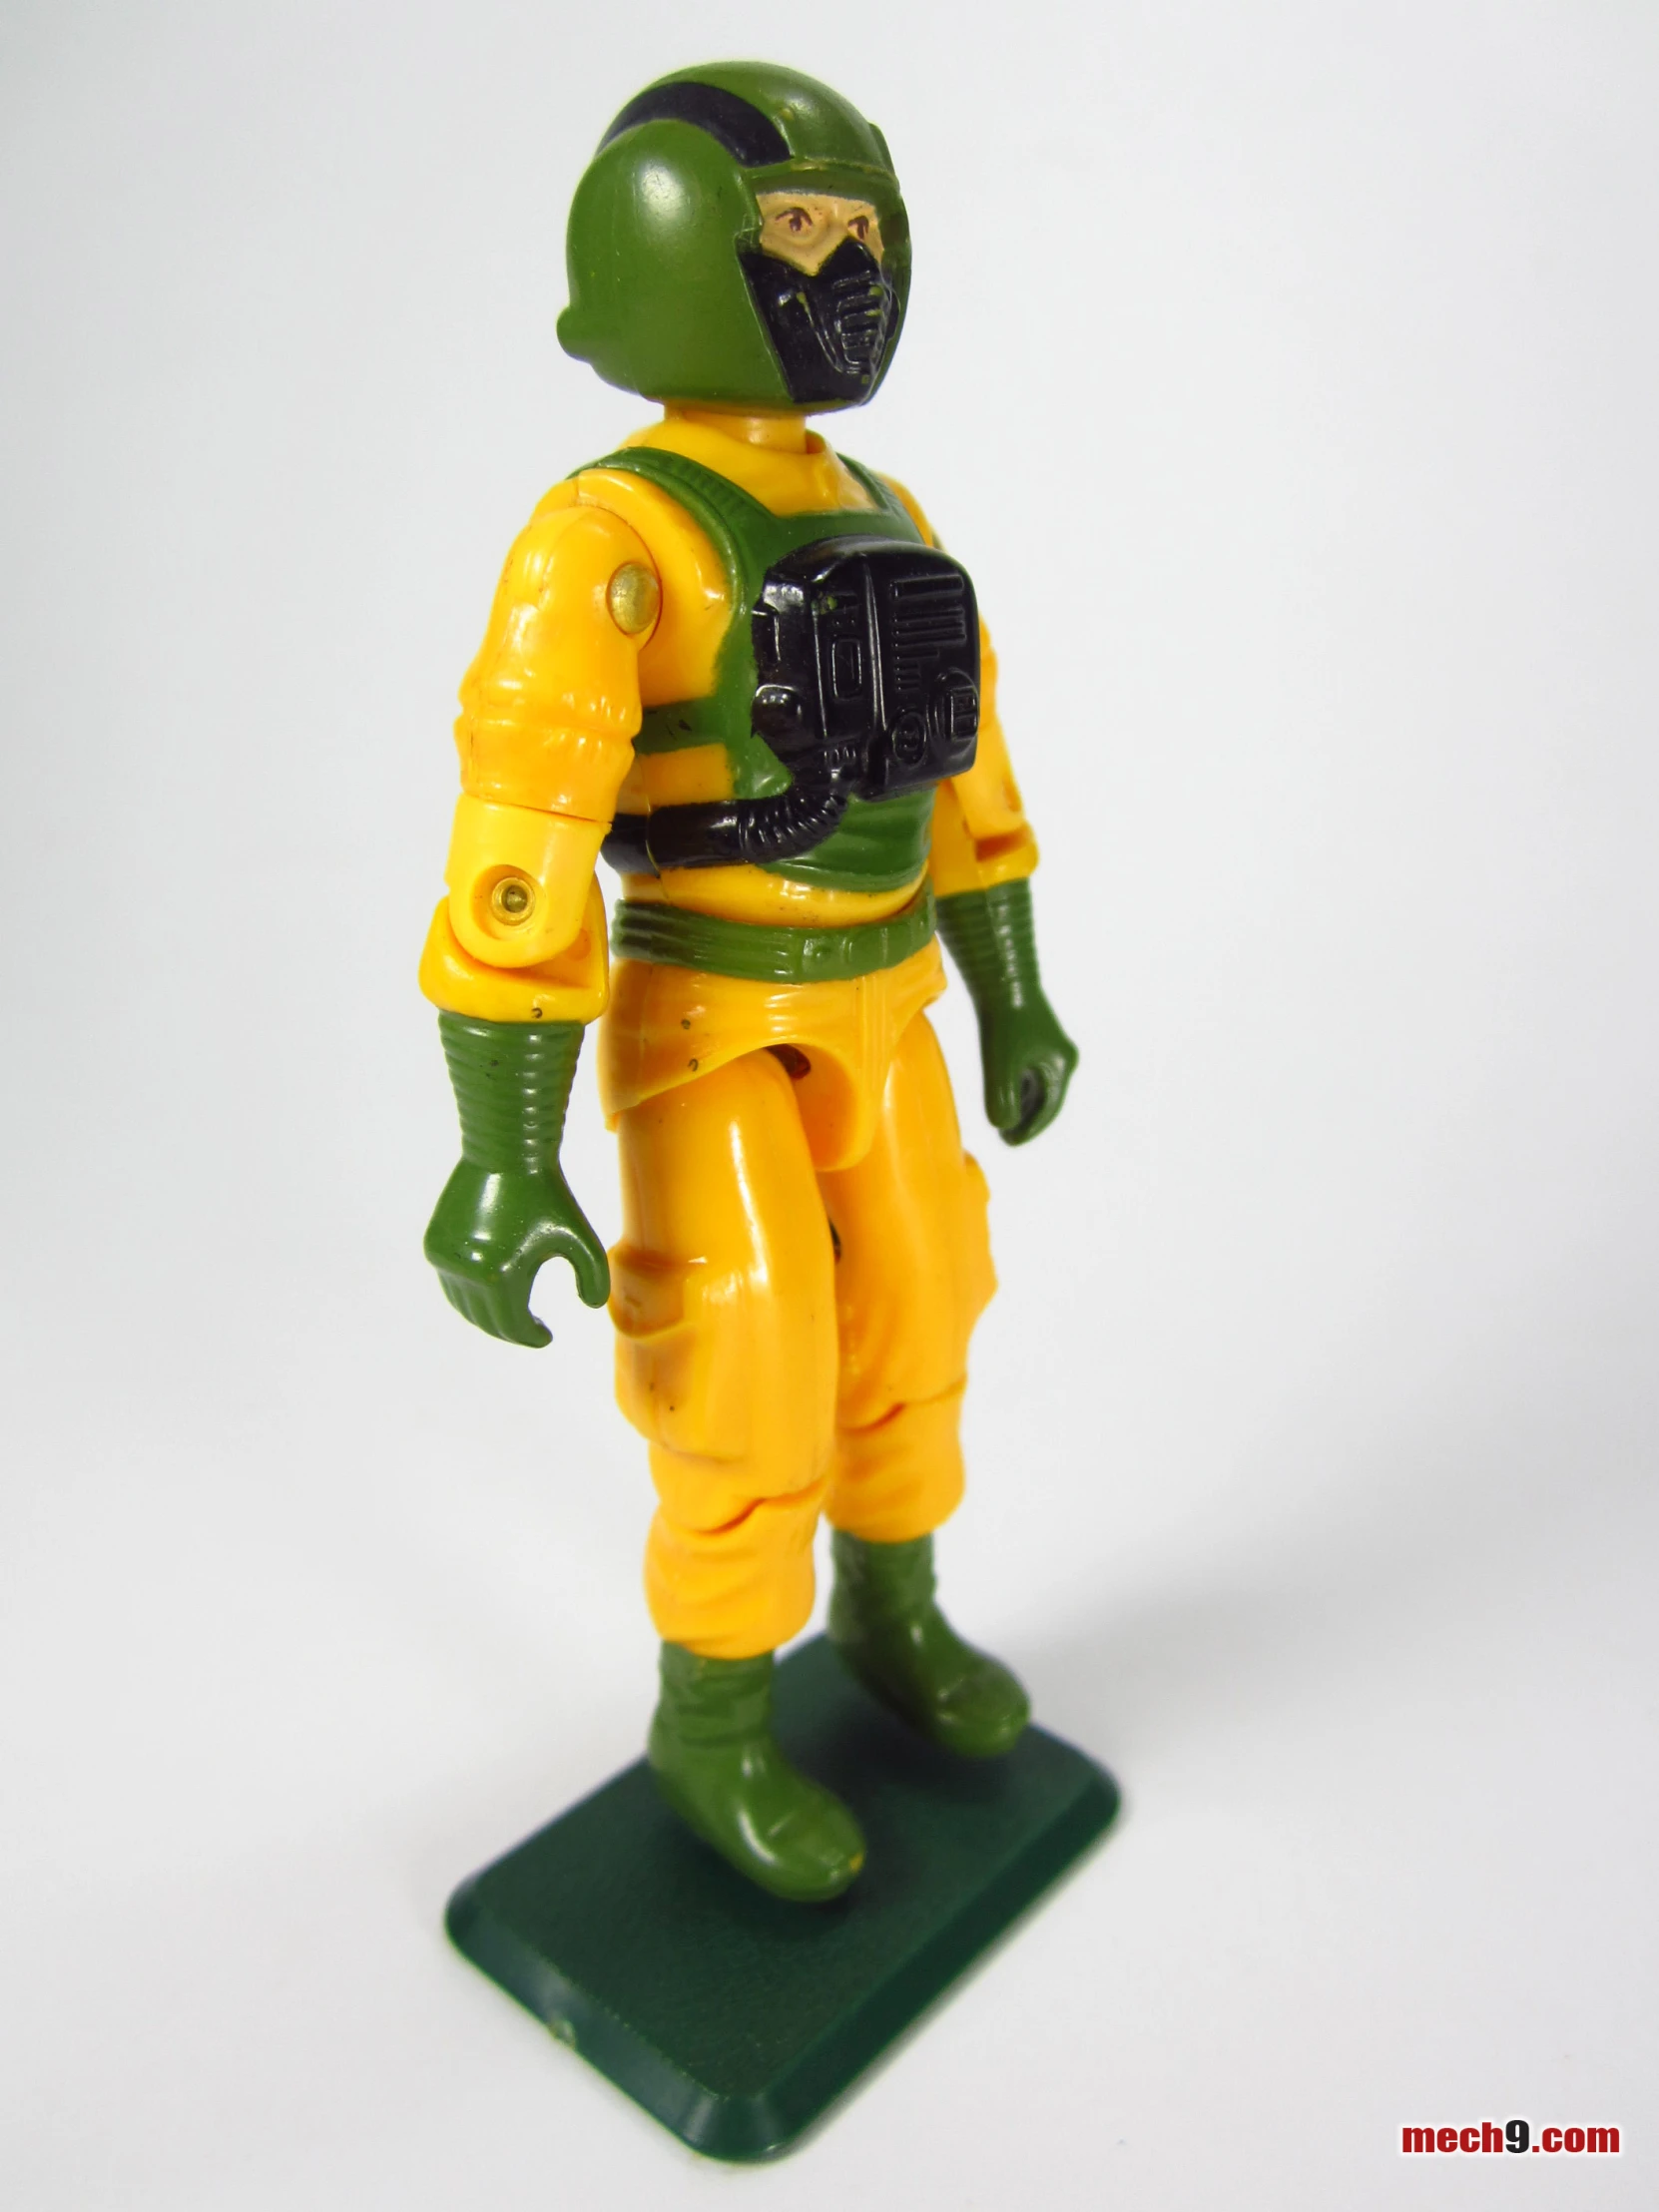 the action figure is yellow and green with a black mask